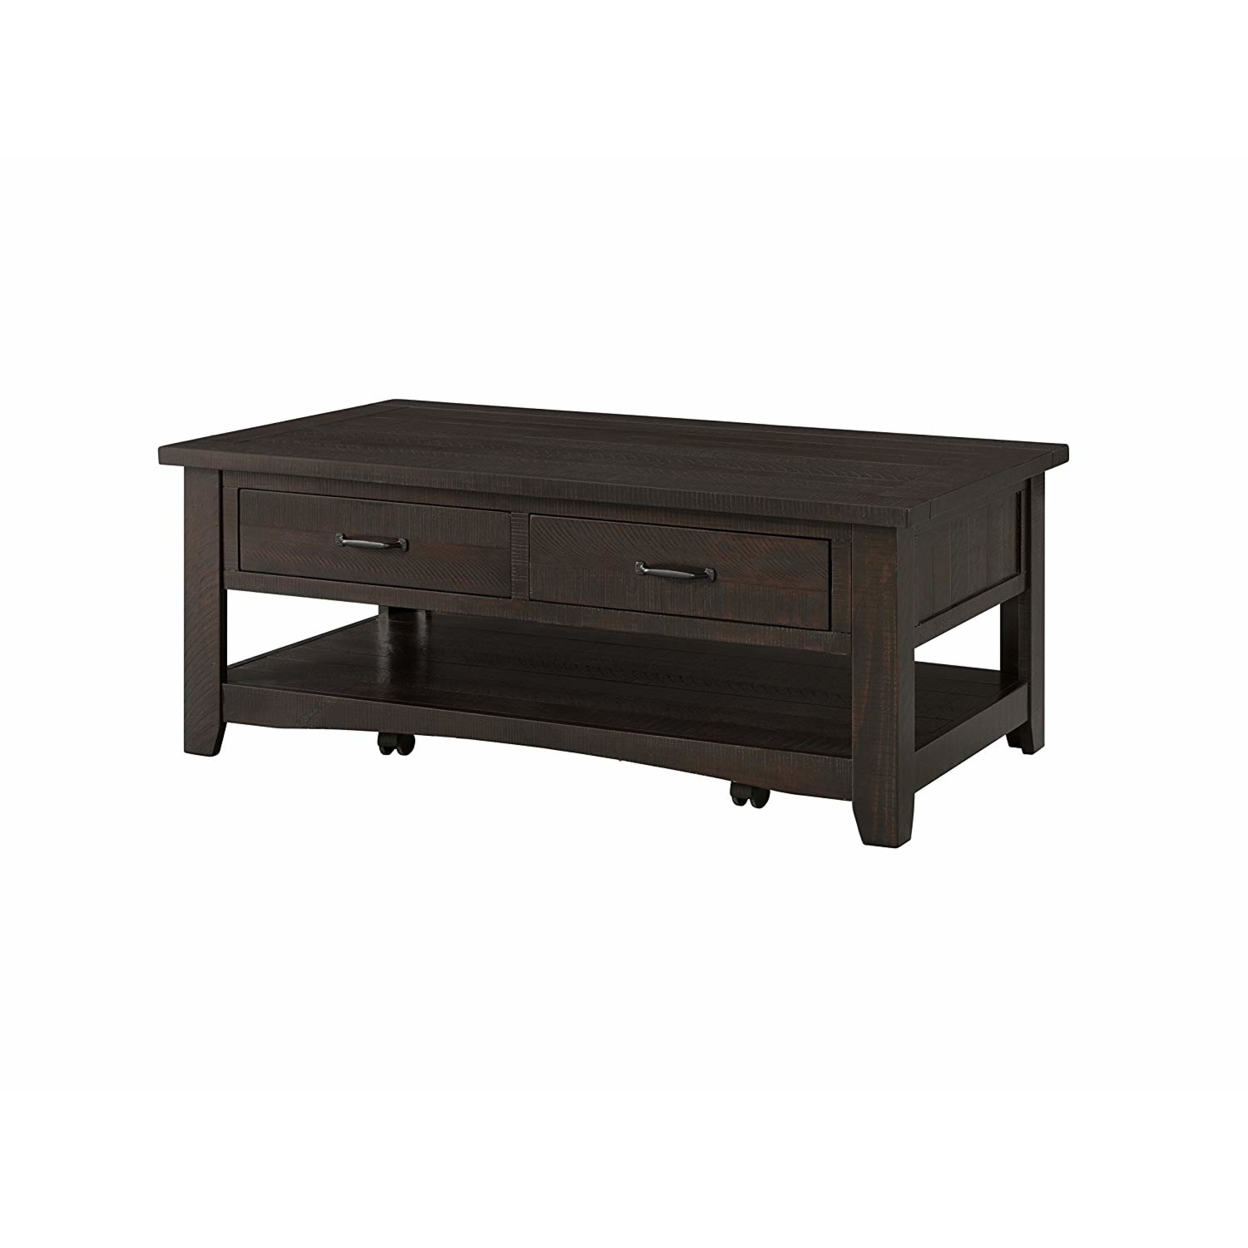 Wooden Coffee Table With Two Drawers, Espresso Brown- Saltoro Sherpi